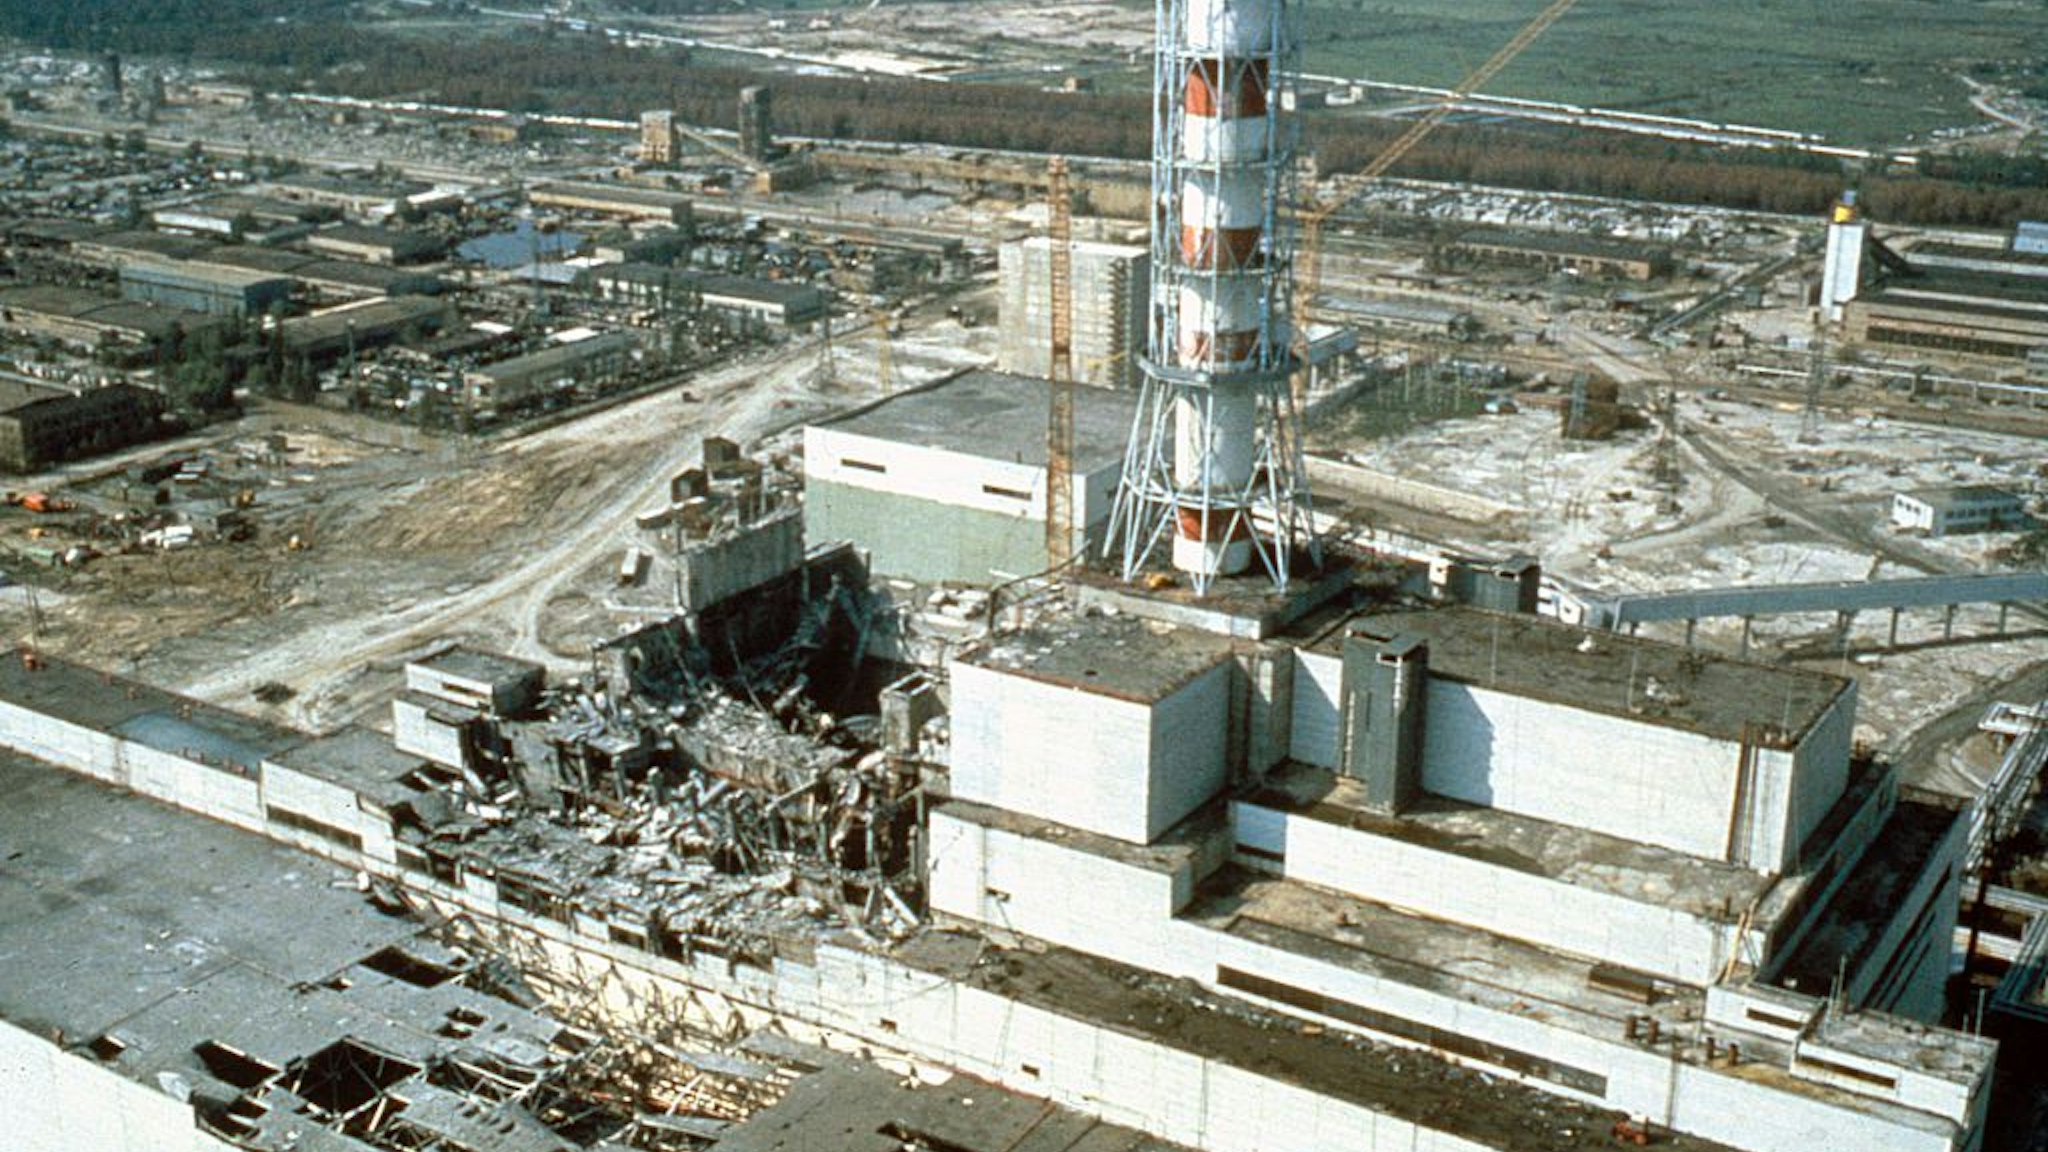 Chernobyl nuclear power plant a few weeks after the disaster. Chernobyl, Ukraine, USSR, May 1986.